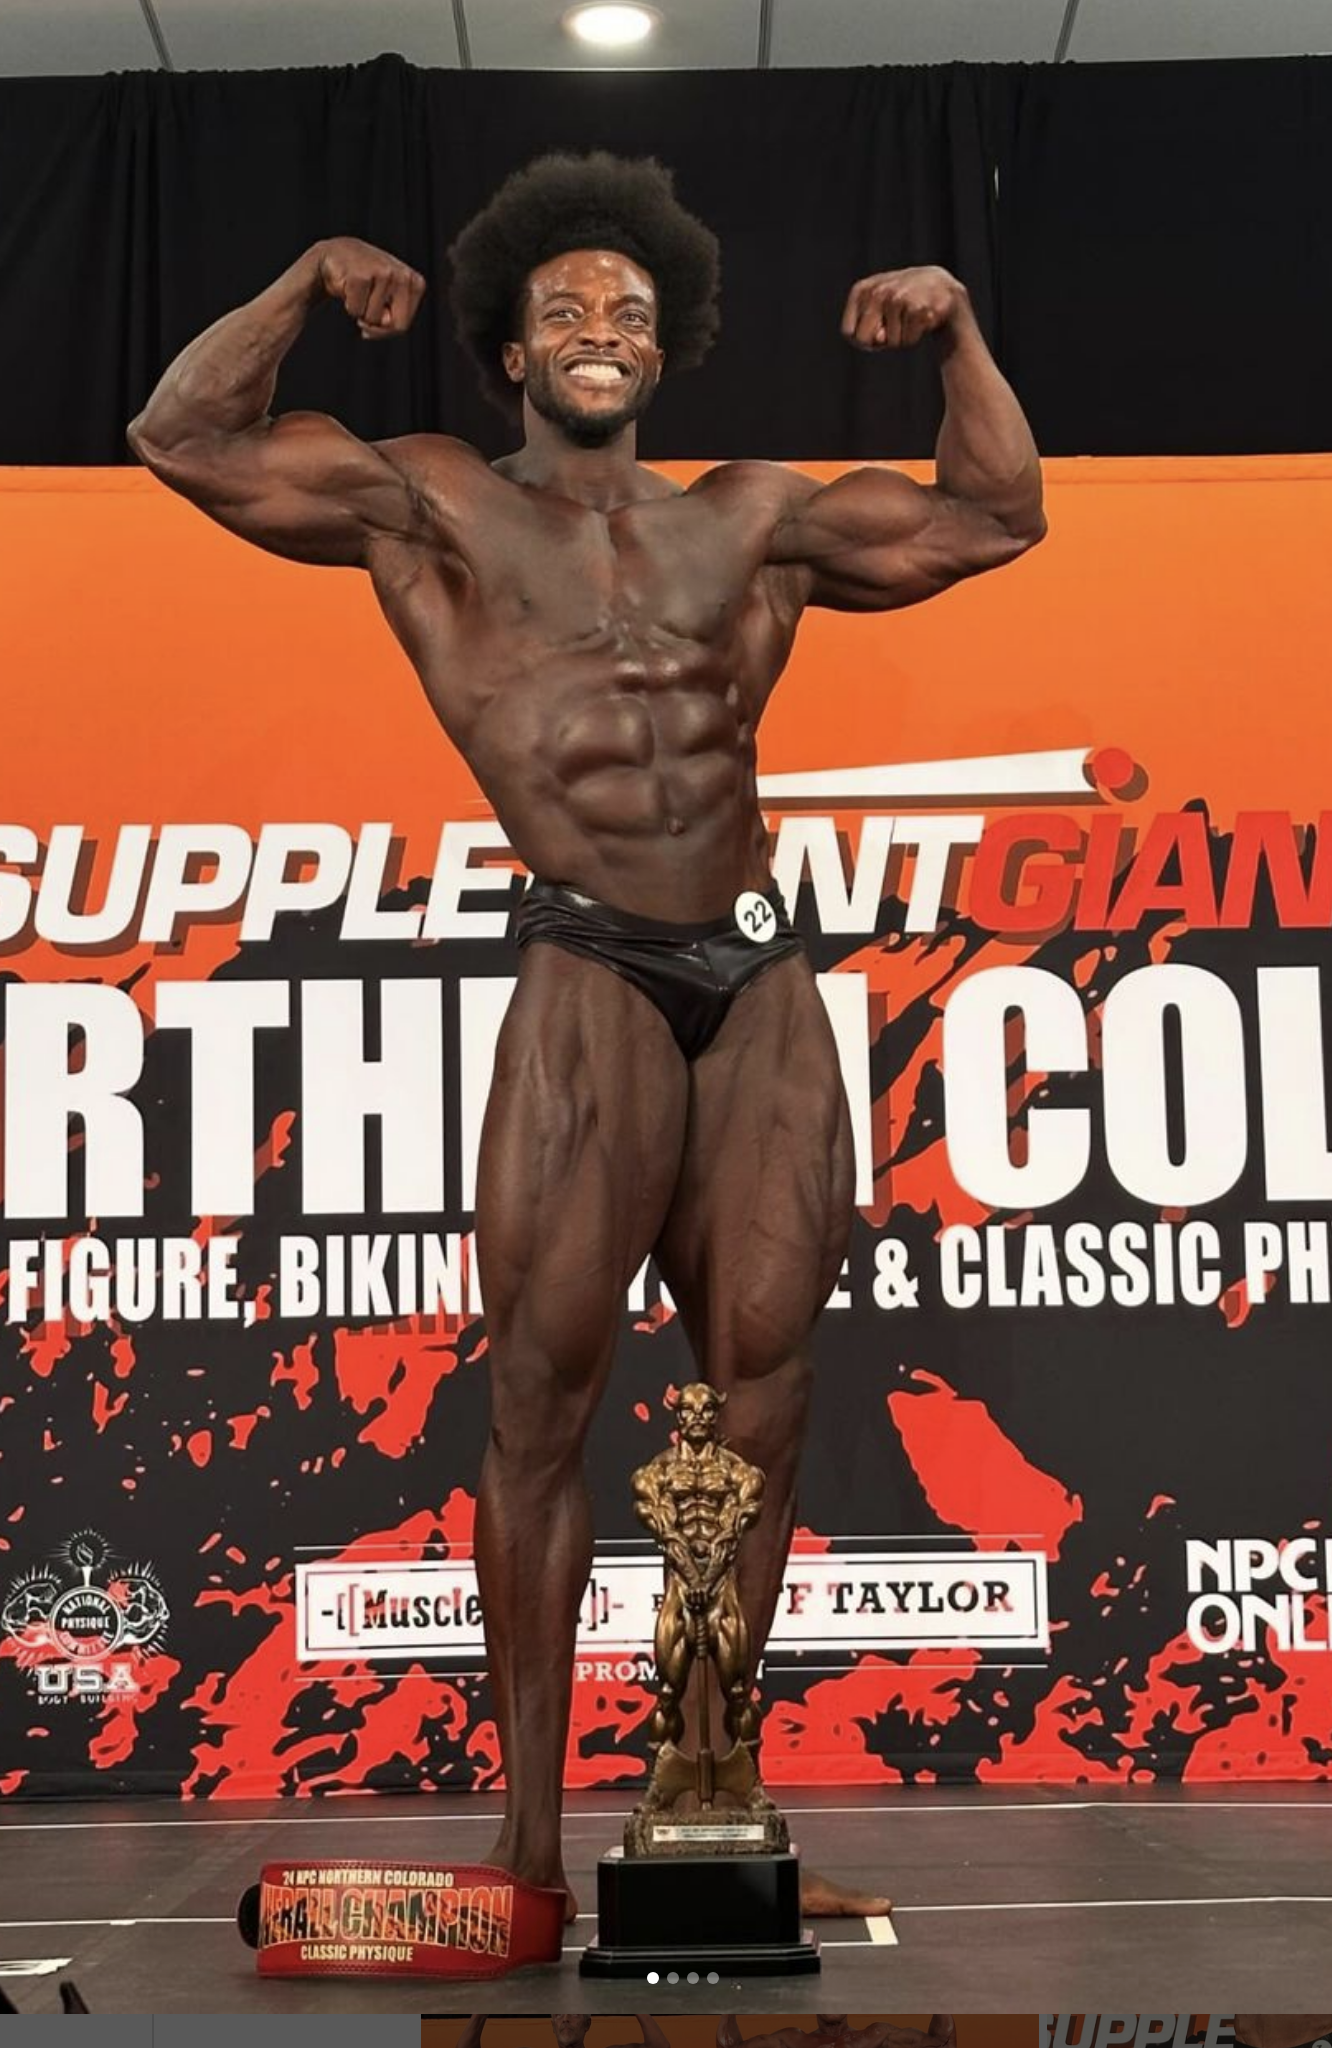 The NPC Supplement Giant Northern Colorado Men’s Classic Physique - OPEN OVERALL